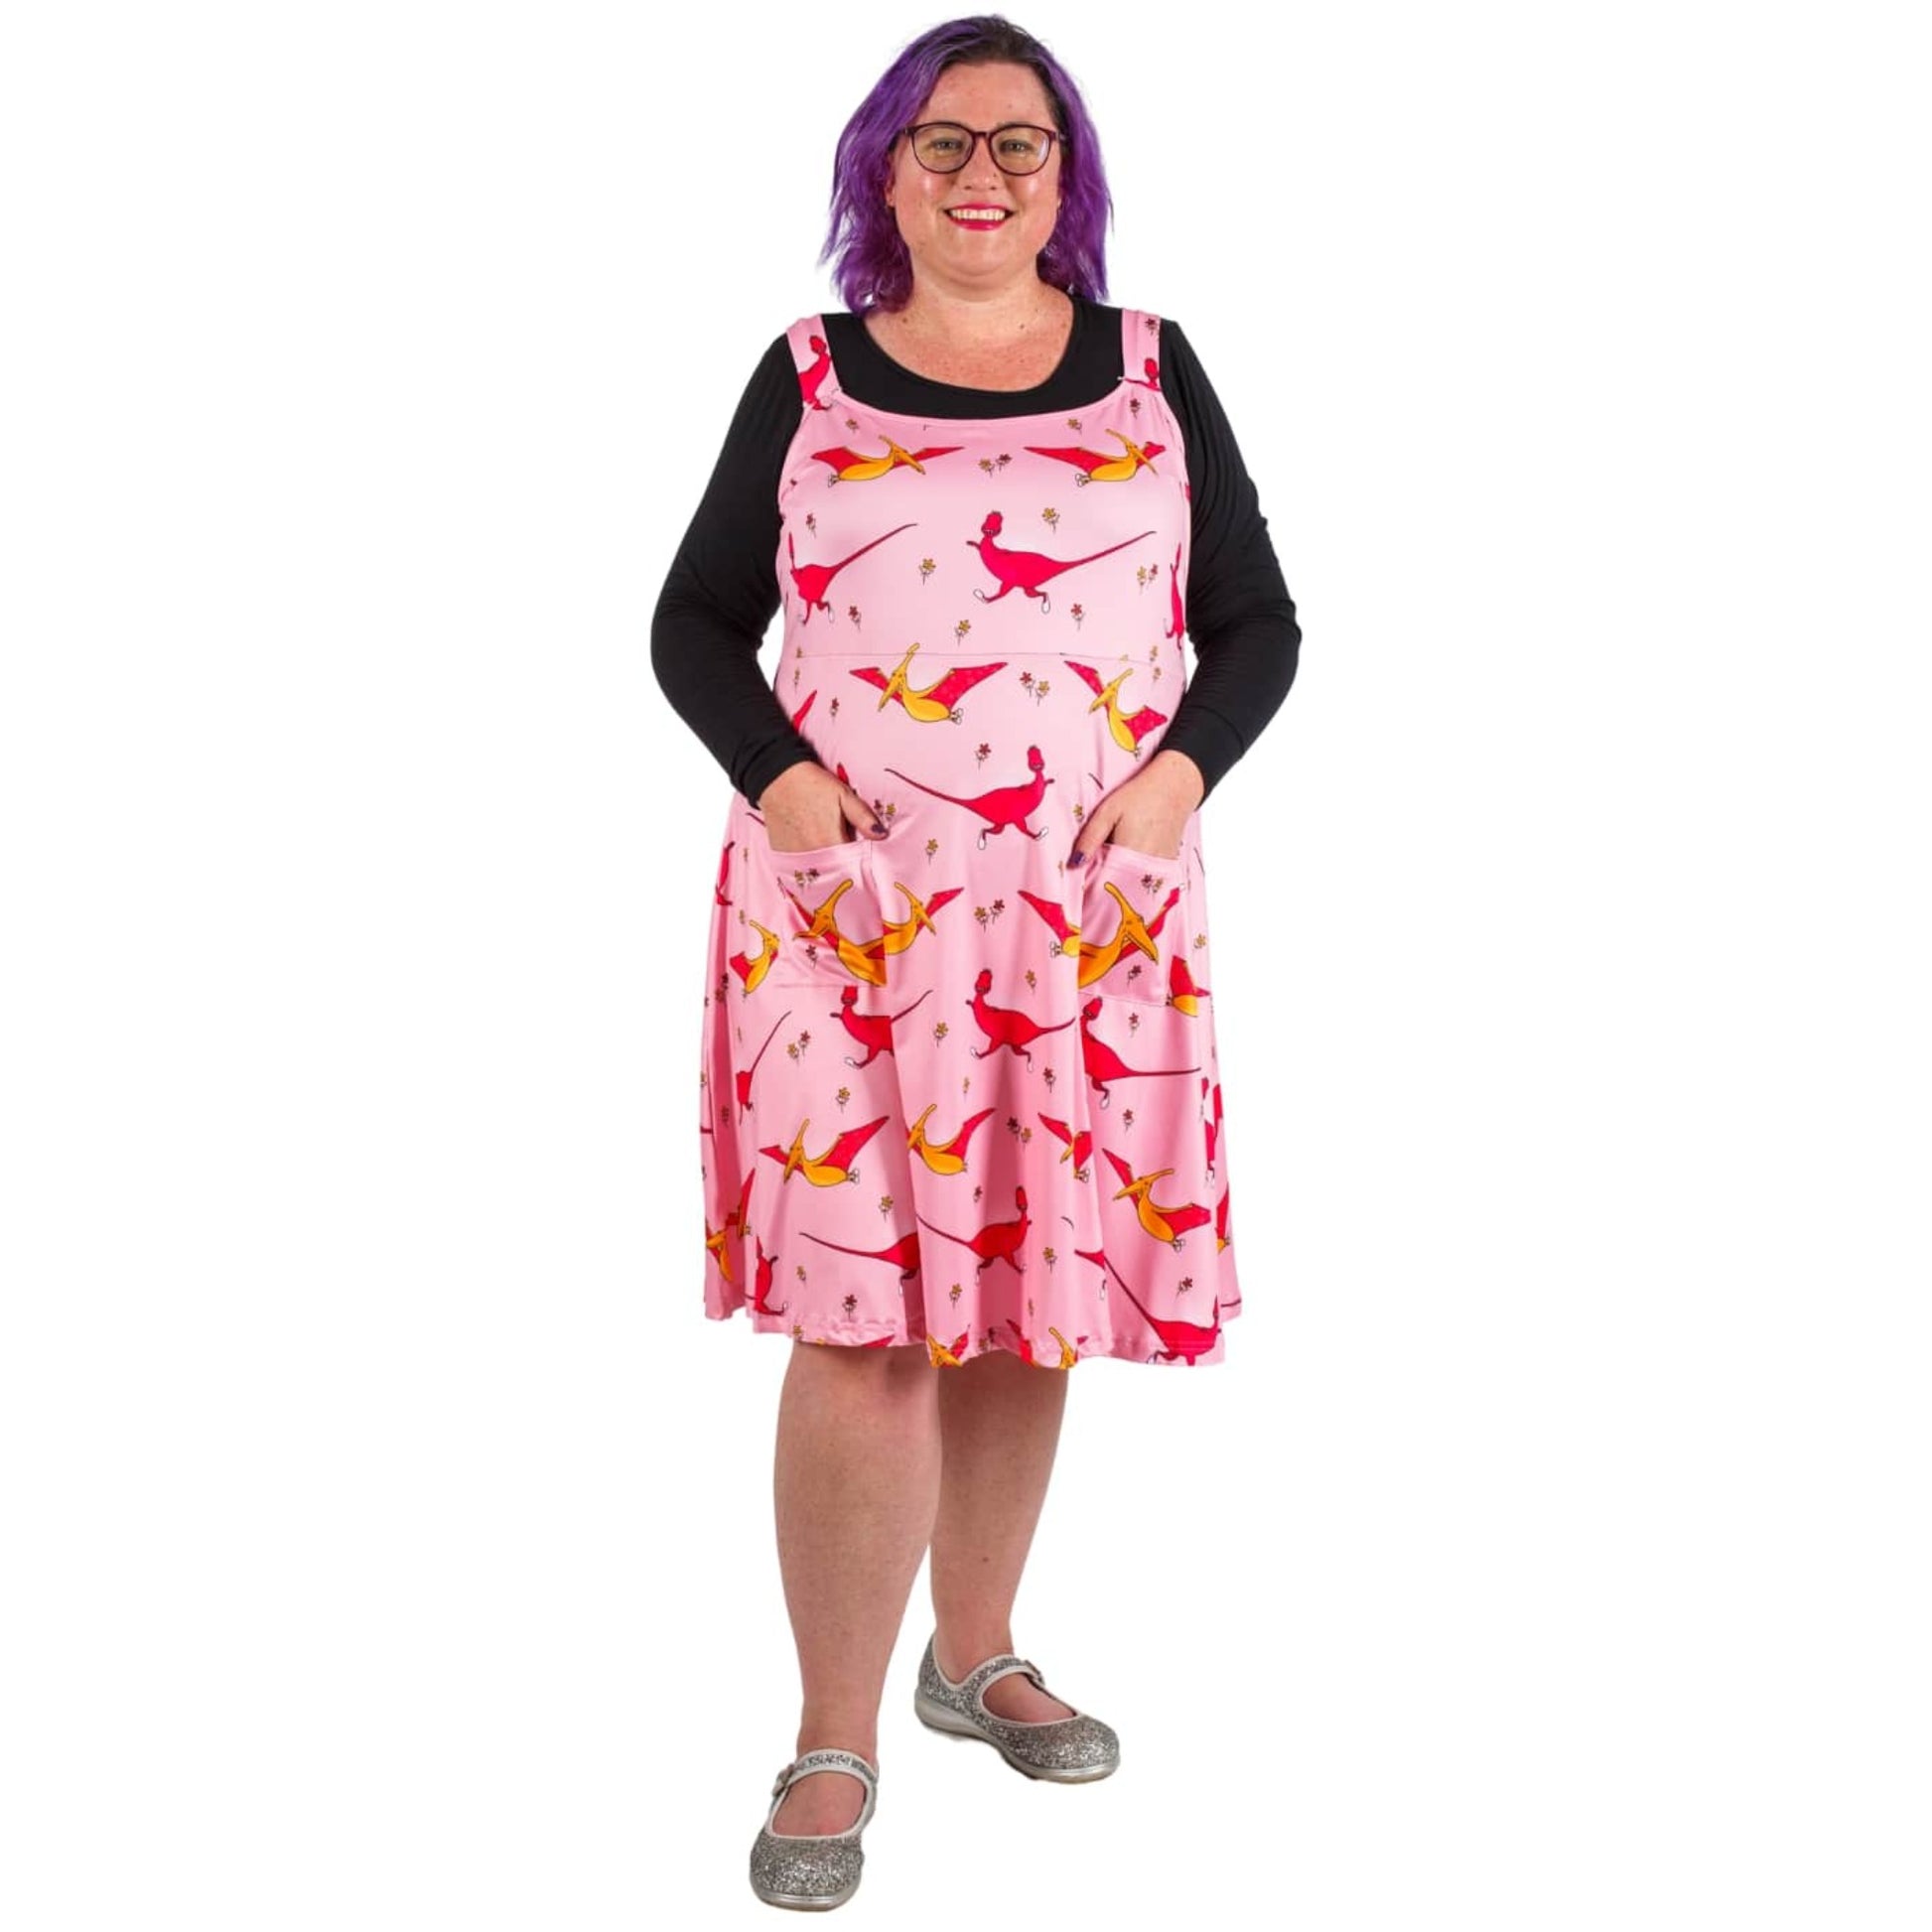 Dino Quirky Pinafore by RainbowsAndFairies.com.au (Dinosaur - Jurassic Park - Pterodactyl - Velociraptor - Dress With Pockets - Vintage Inspired) - SKU: CL_PFORE_DINOQ_ORG - Pic-05